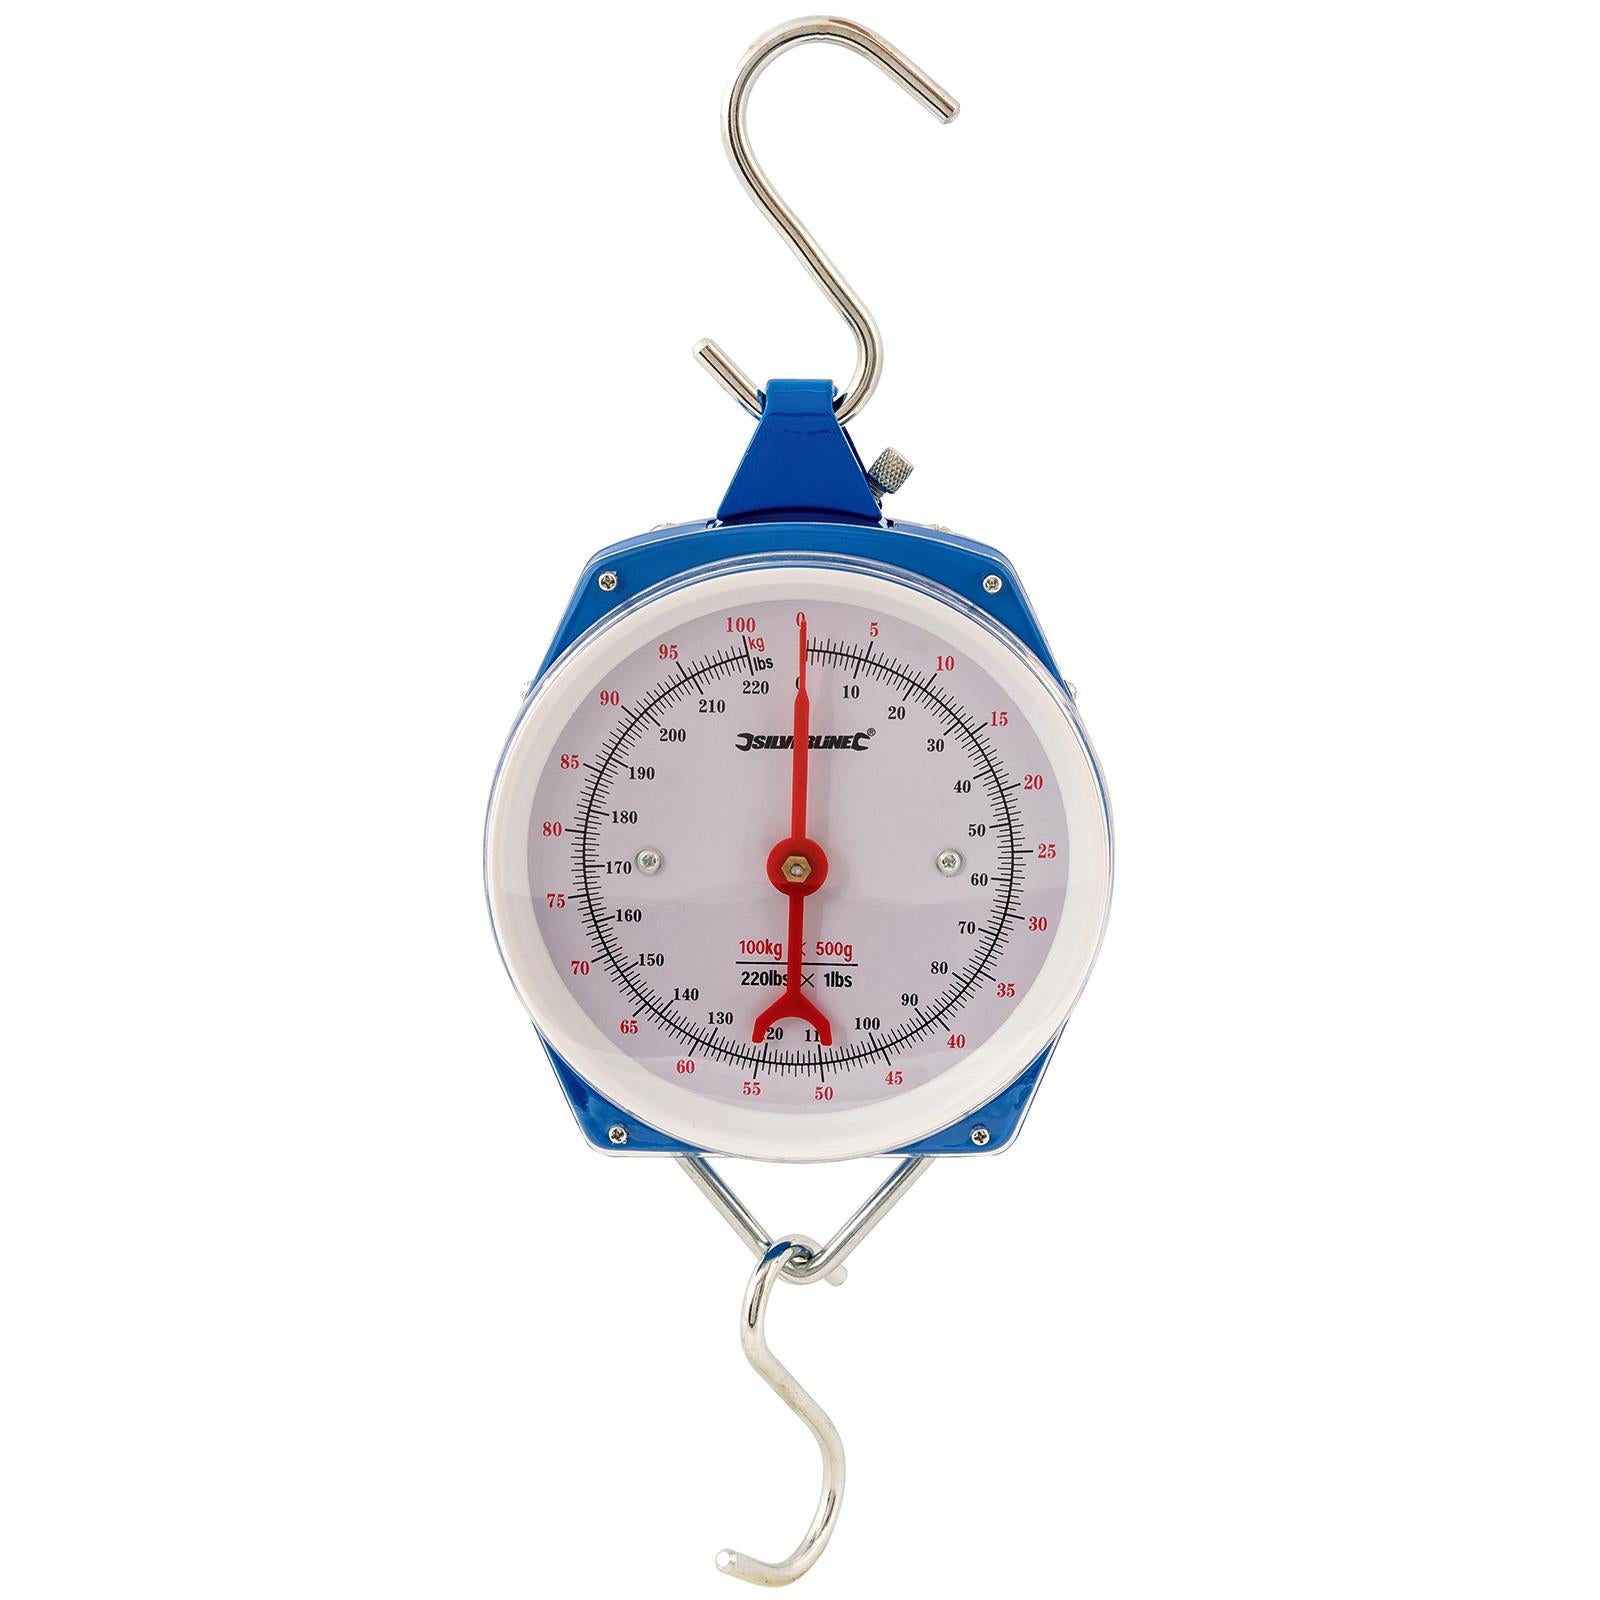 Silverline Hanging Scales Heavy Duty 100kg Metric and Imperial Rigid Hook Fishing